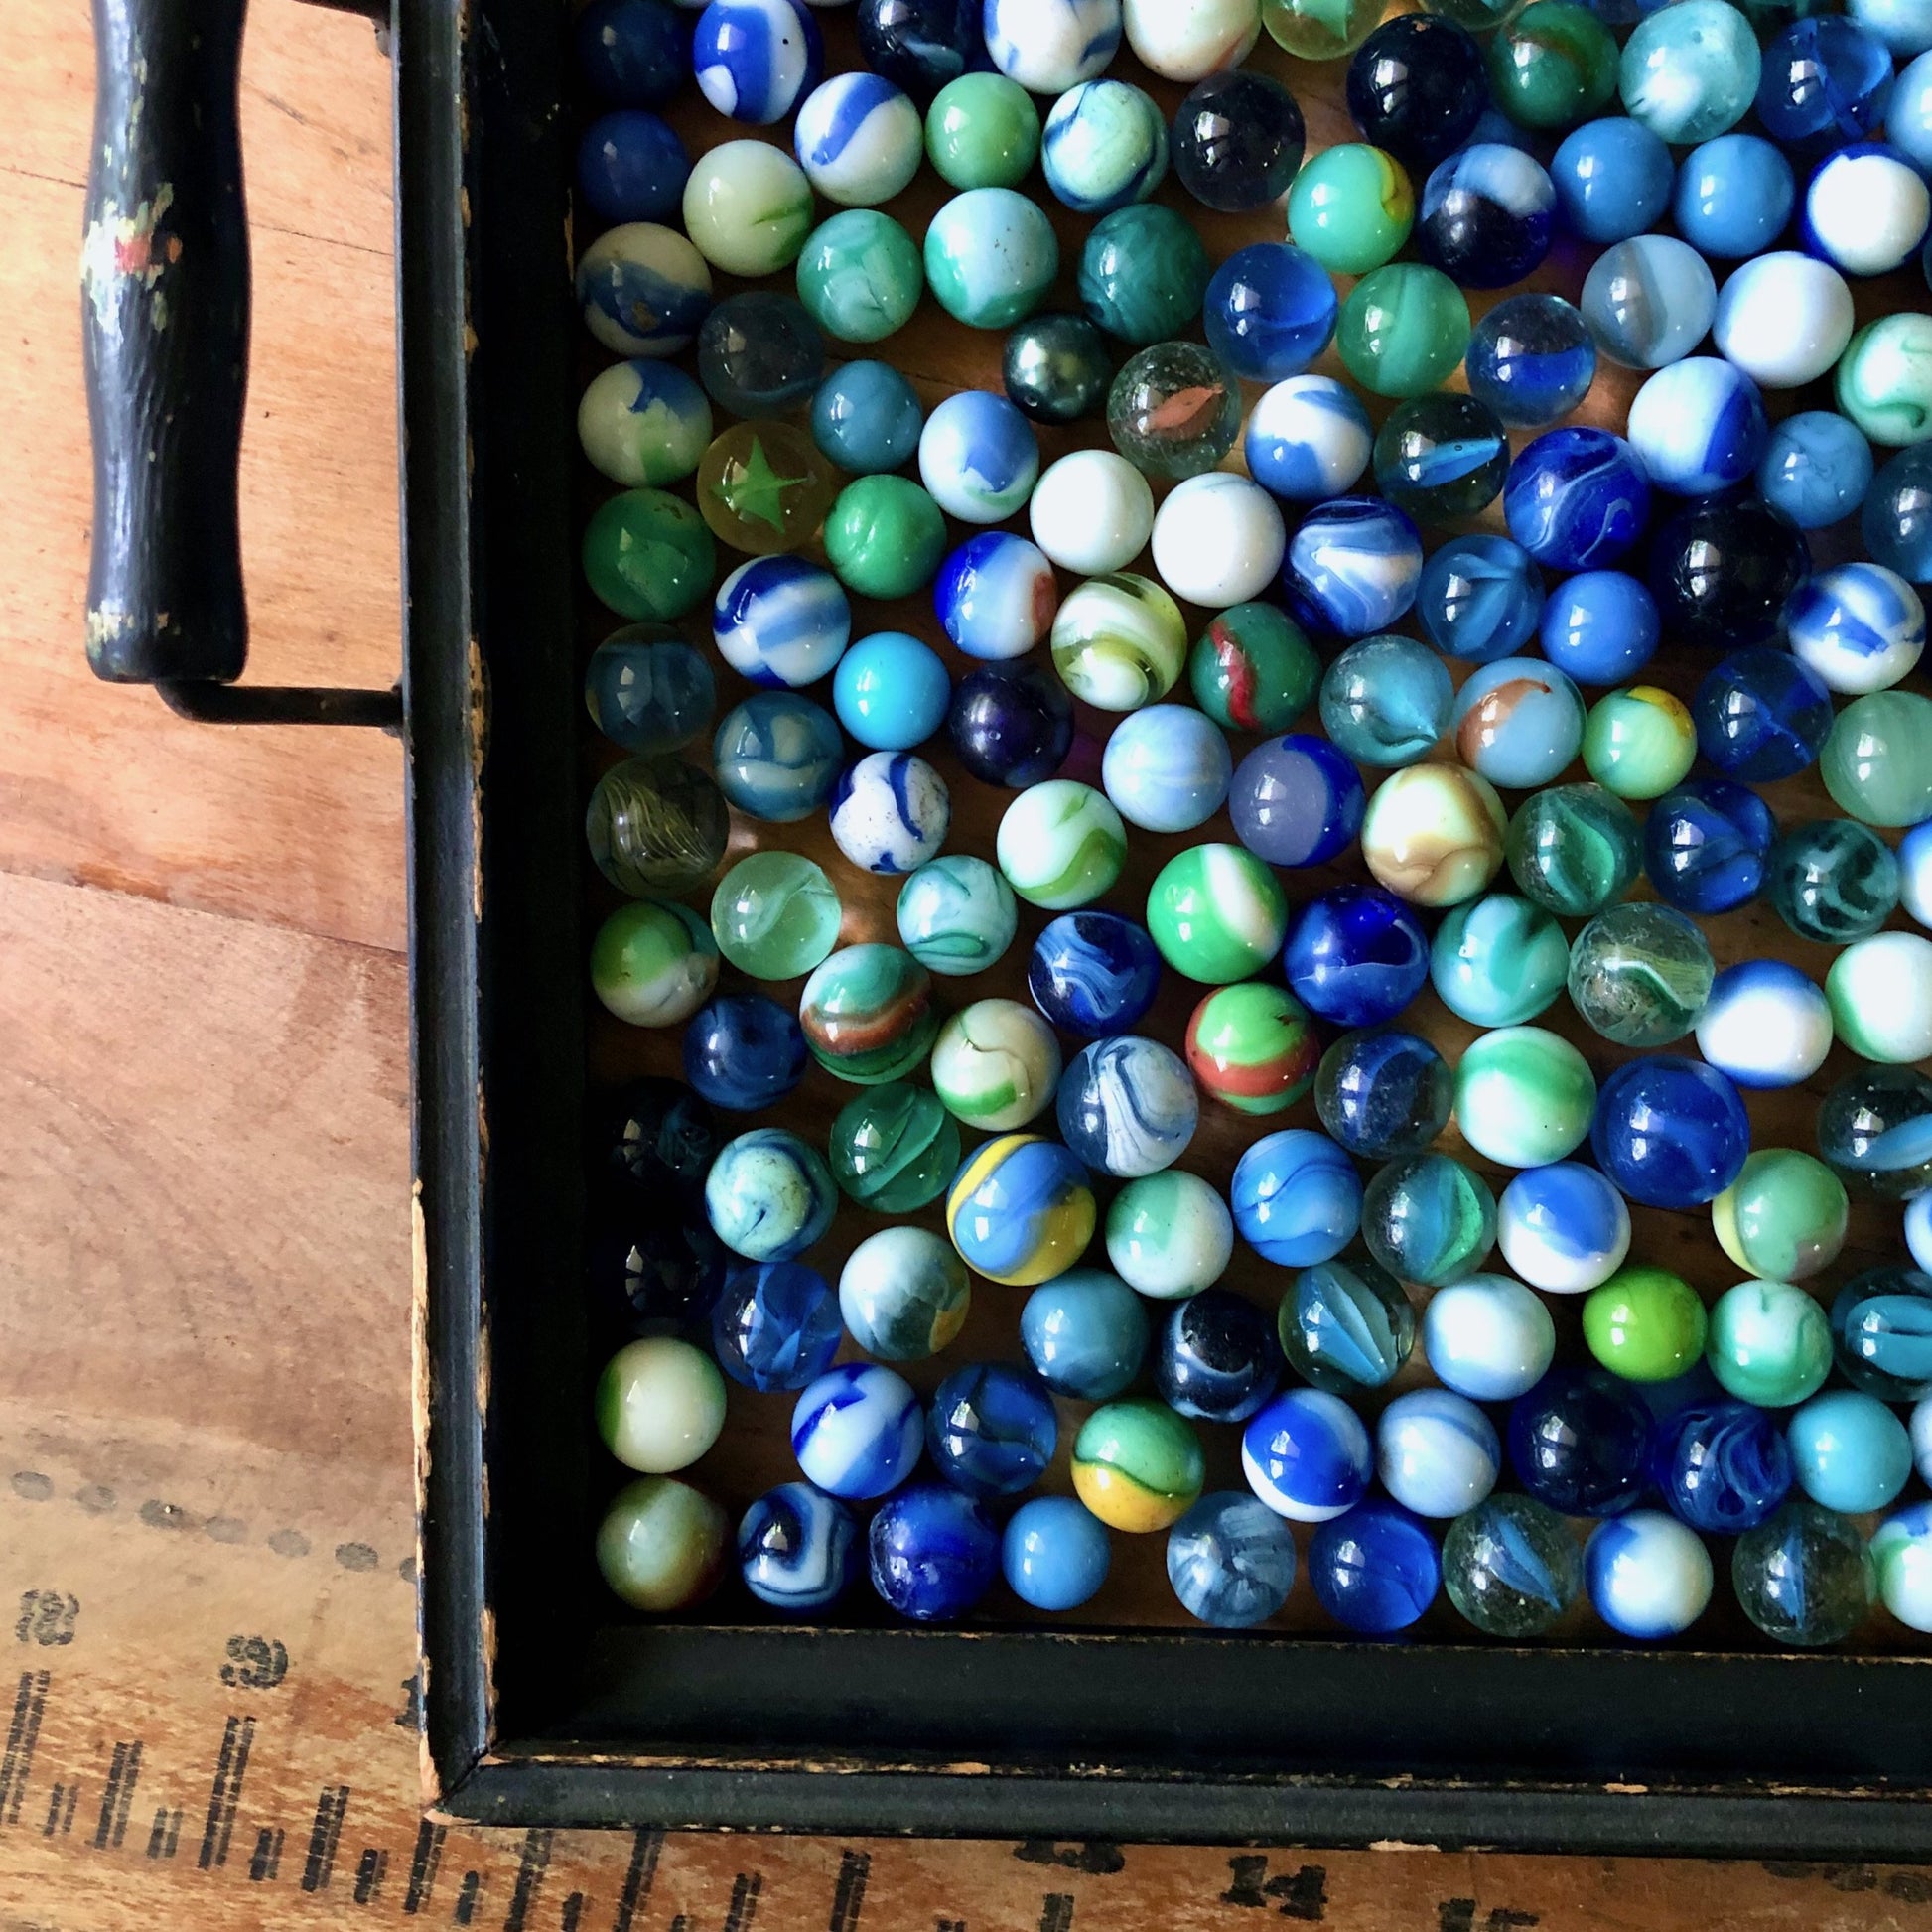 Antique and Vintage Marbles in Blue Green Coastal Colors, Set of 100 – Rush  Creek Vintage